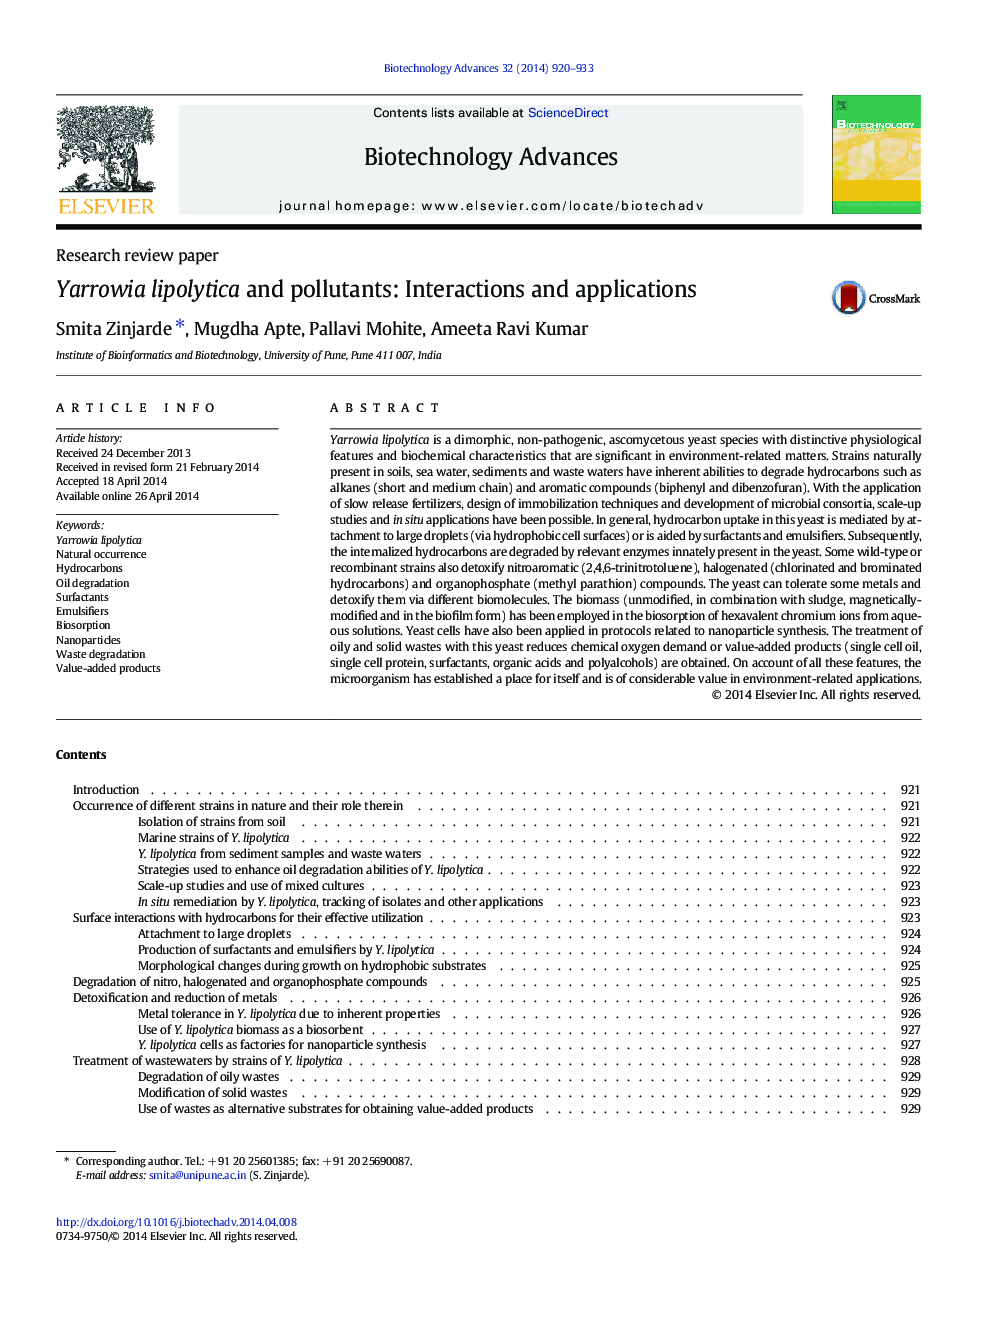 Yarrowia lipolytica and pollutants: Interactions and applications